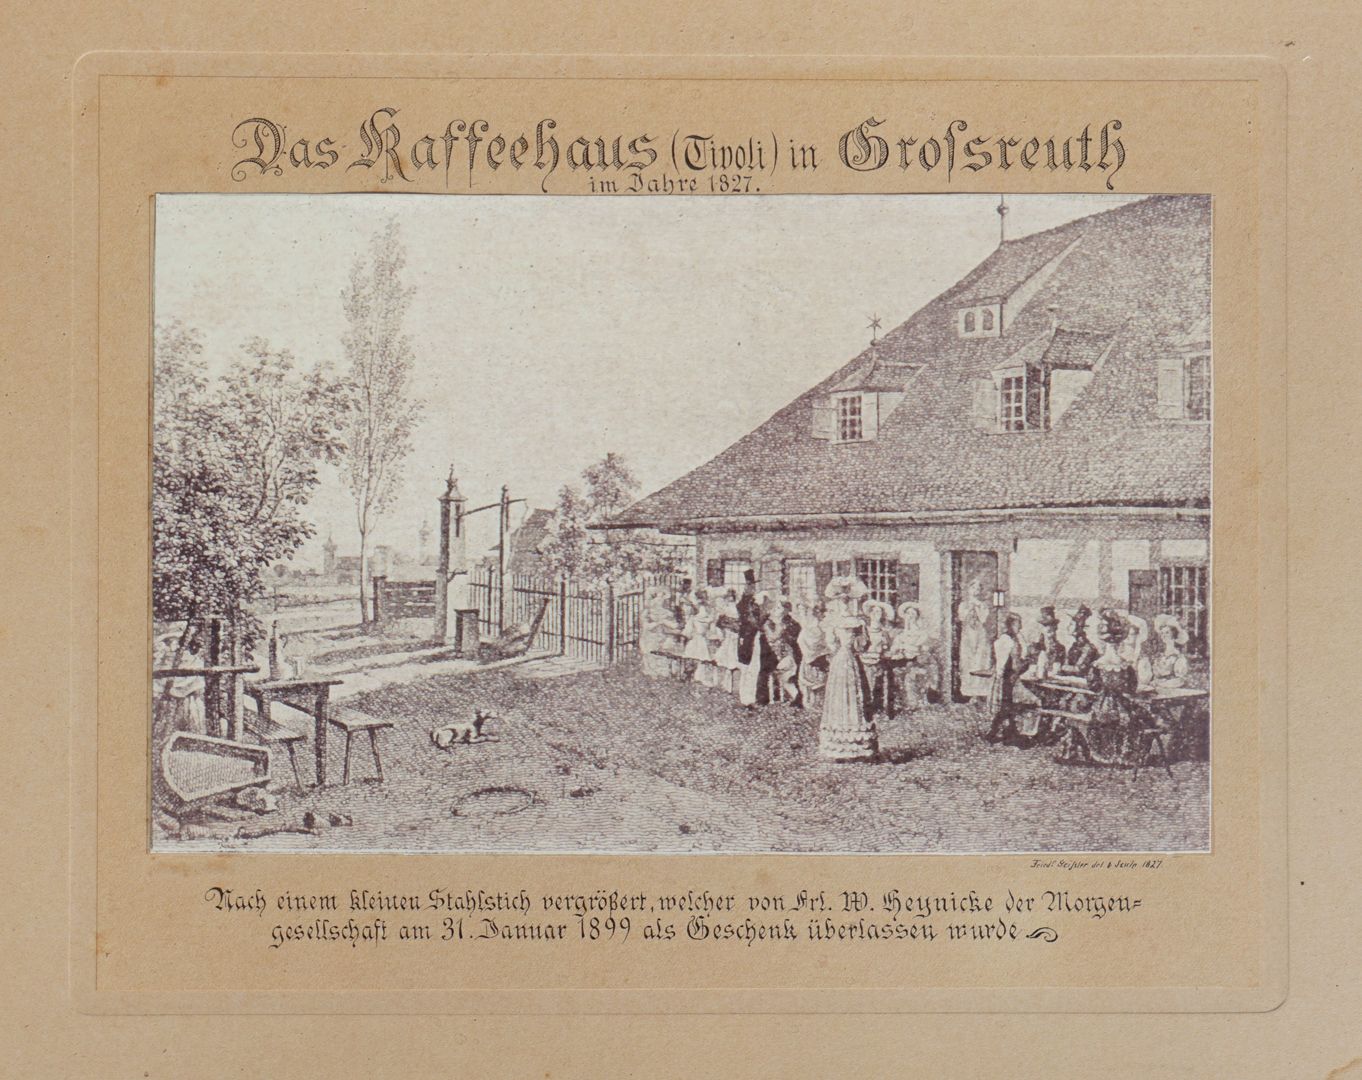 The coffee house (Tivoli) in Großreuth pPicture with dedication inscription